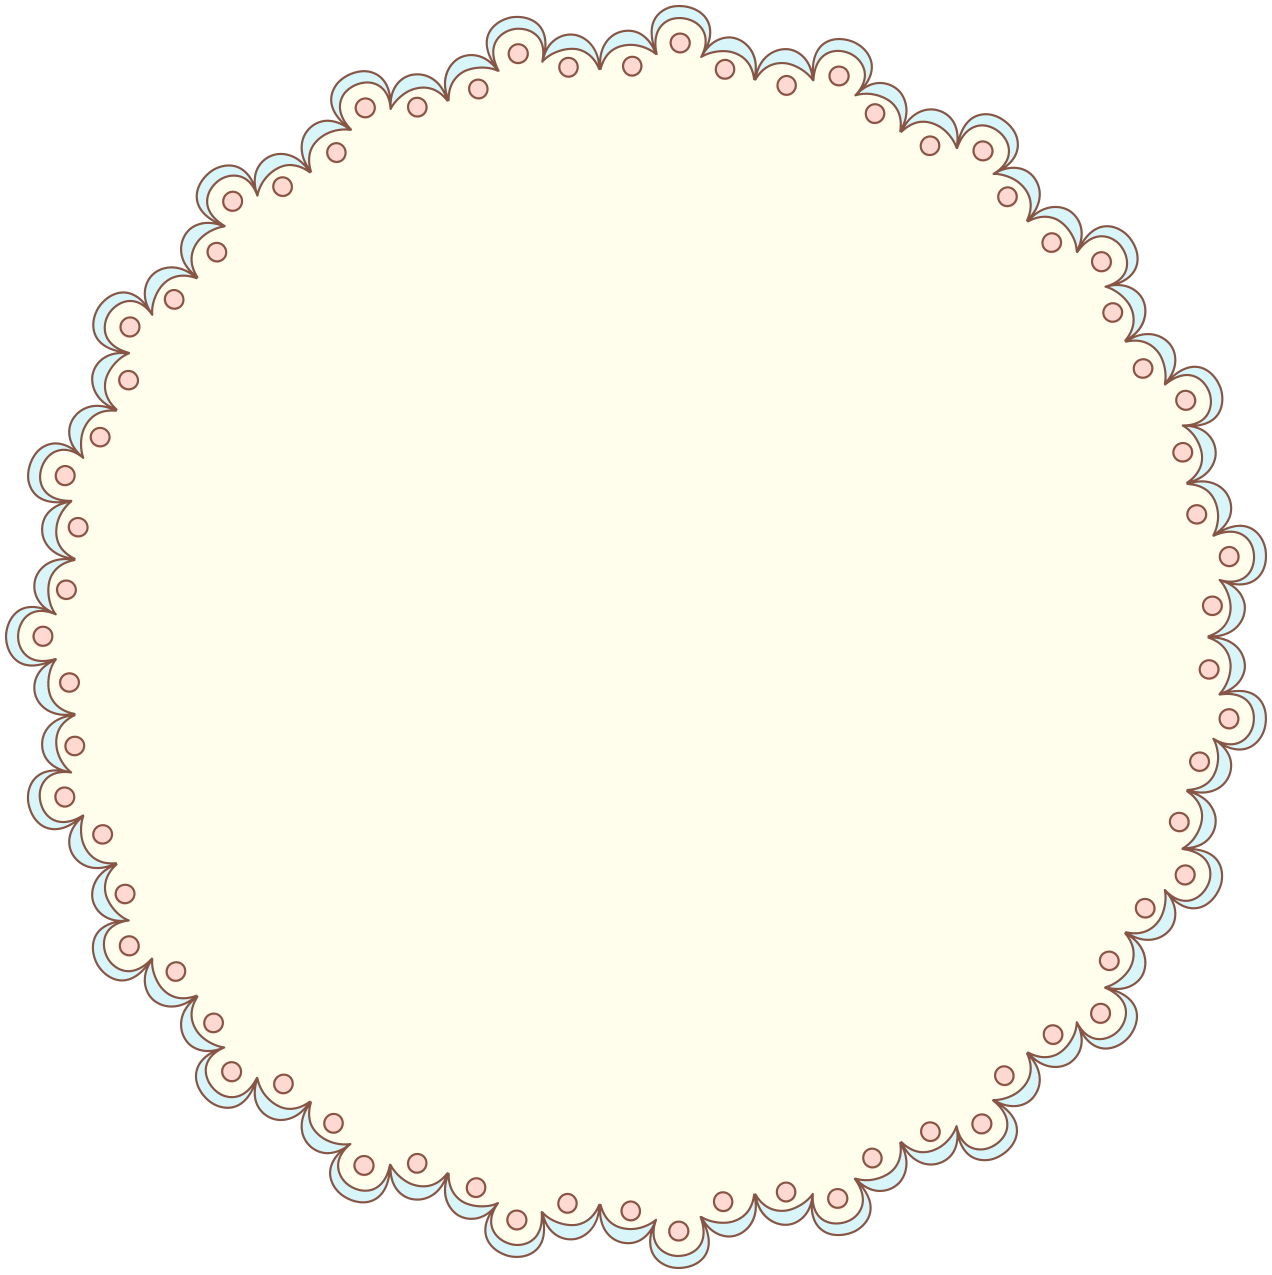 Free Doily Clipart & Designer Resources - Adapted from Vintage ...